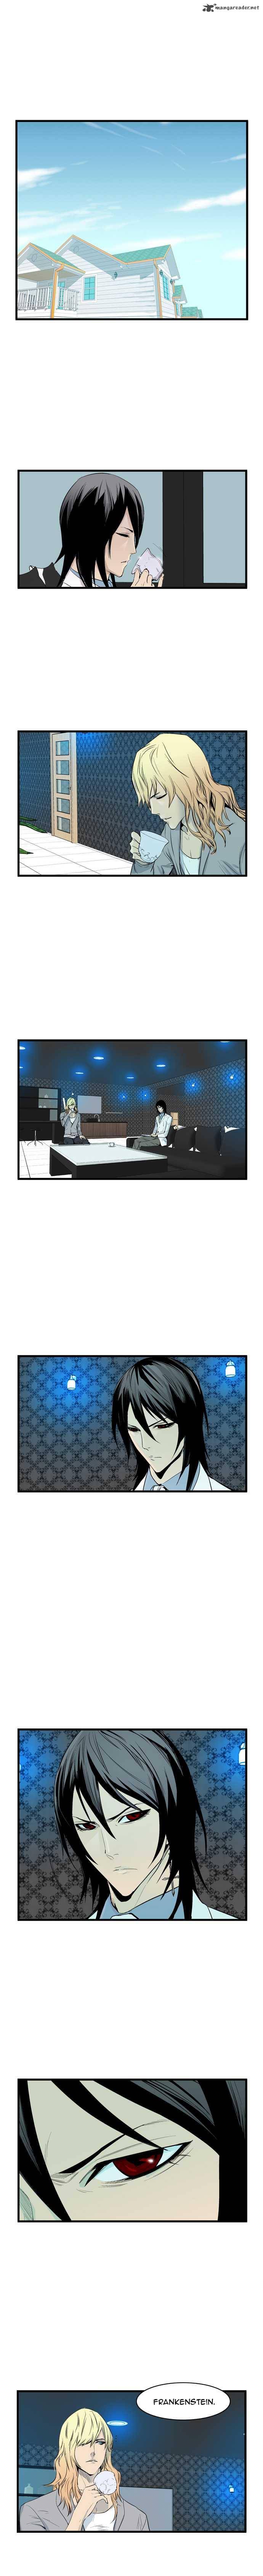 Noblesse Chapter 64 Page 5